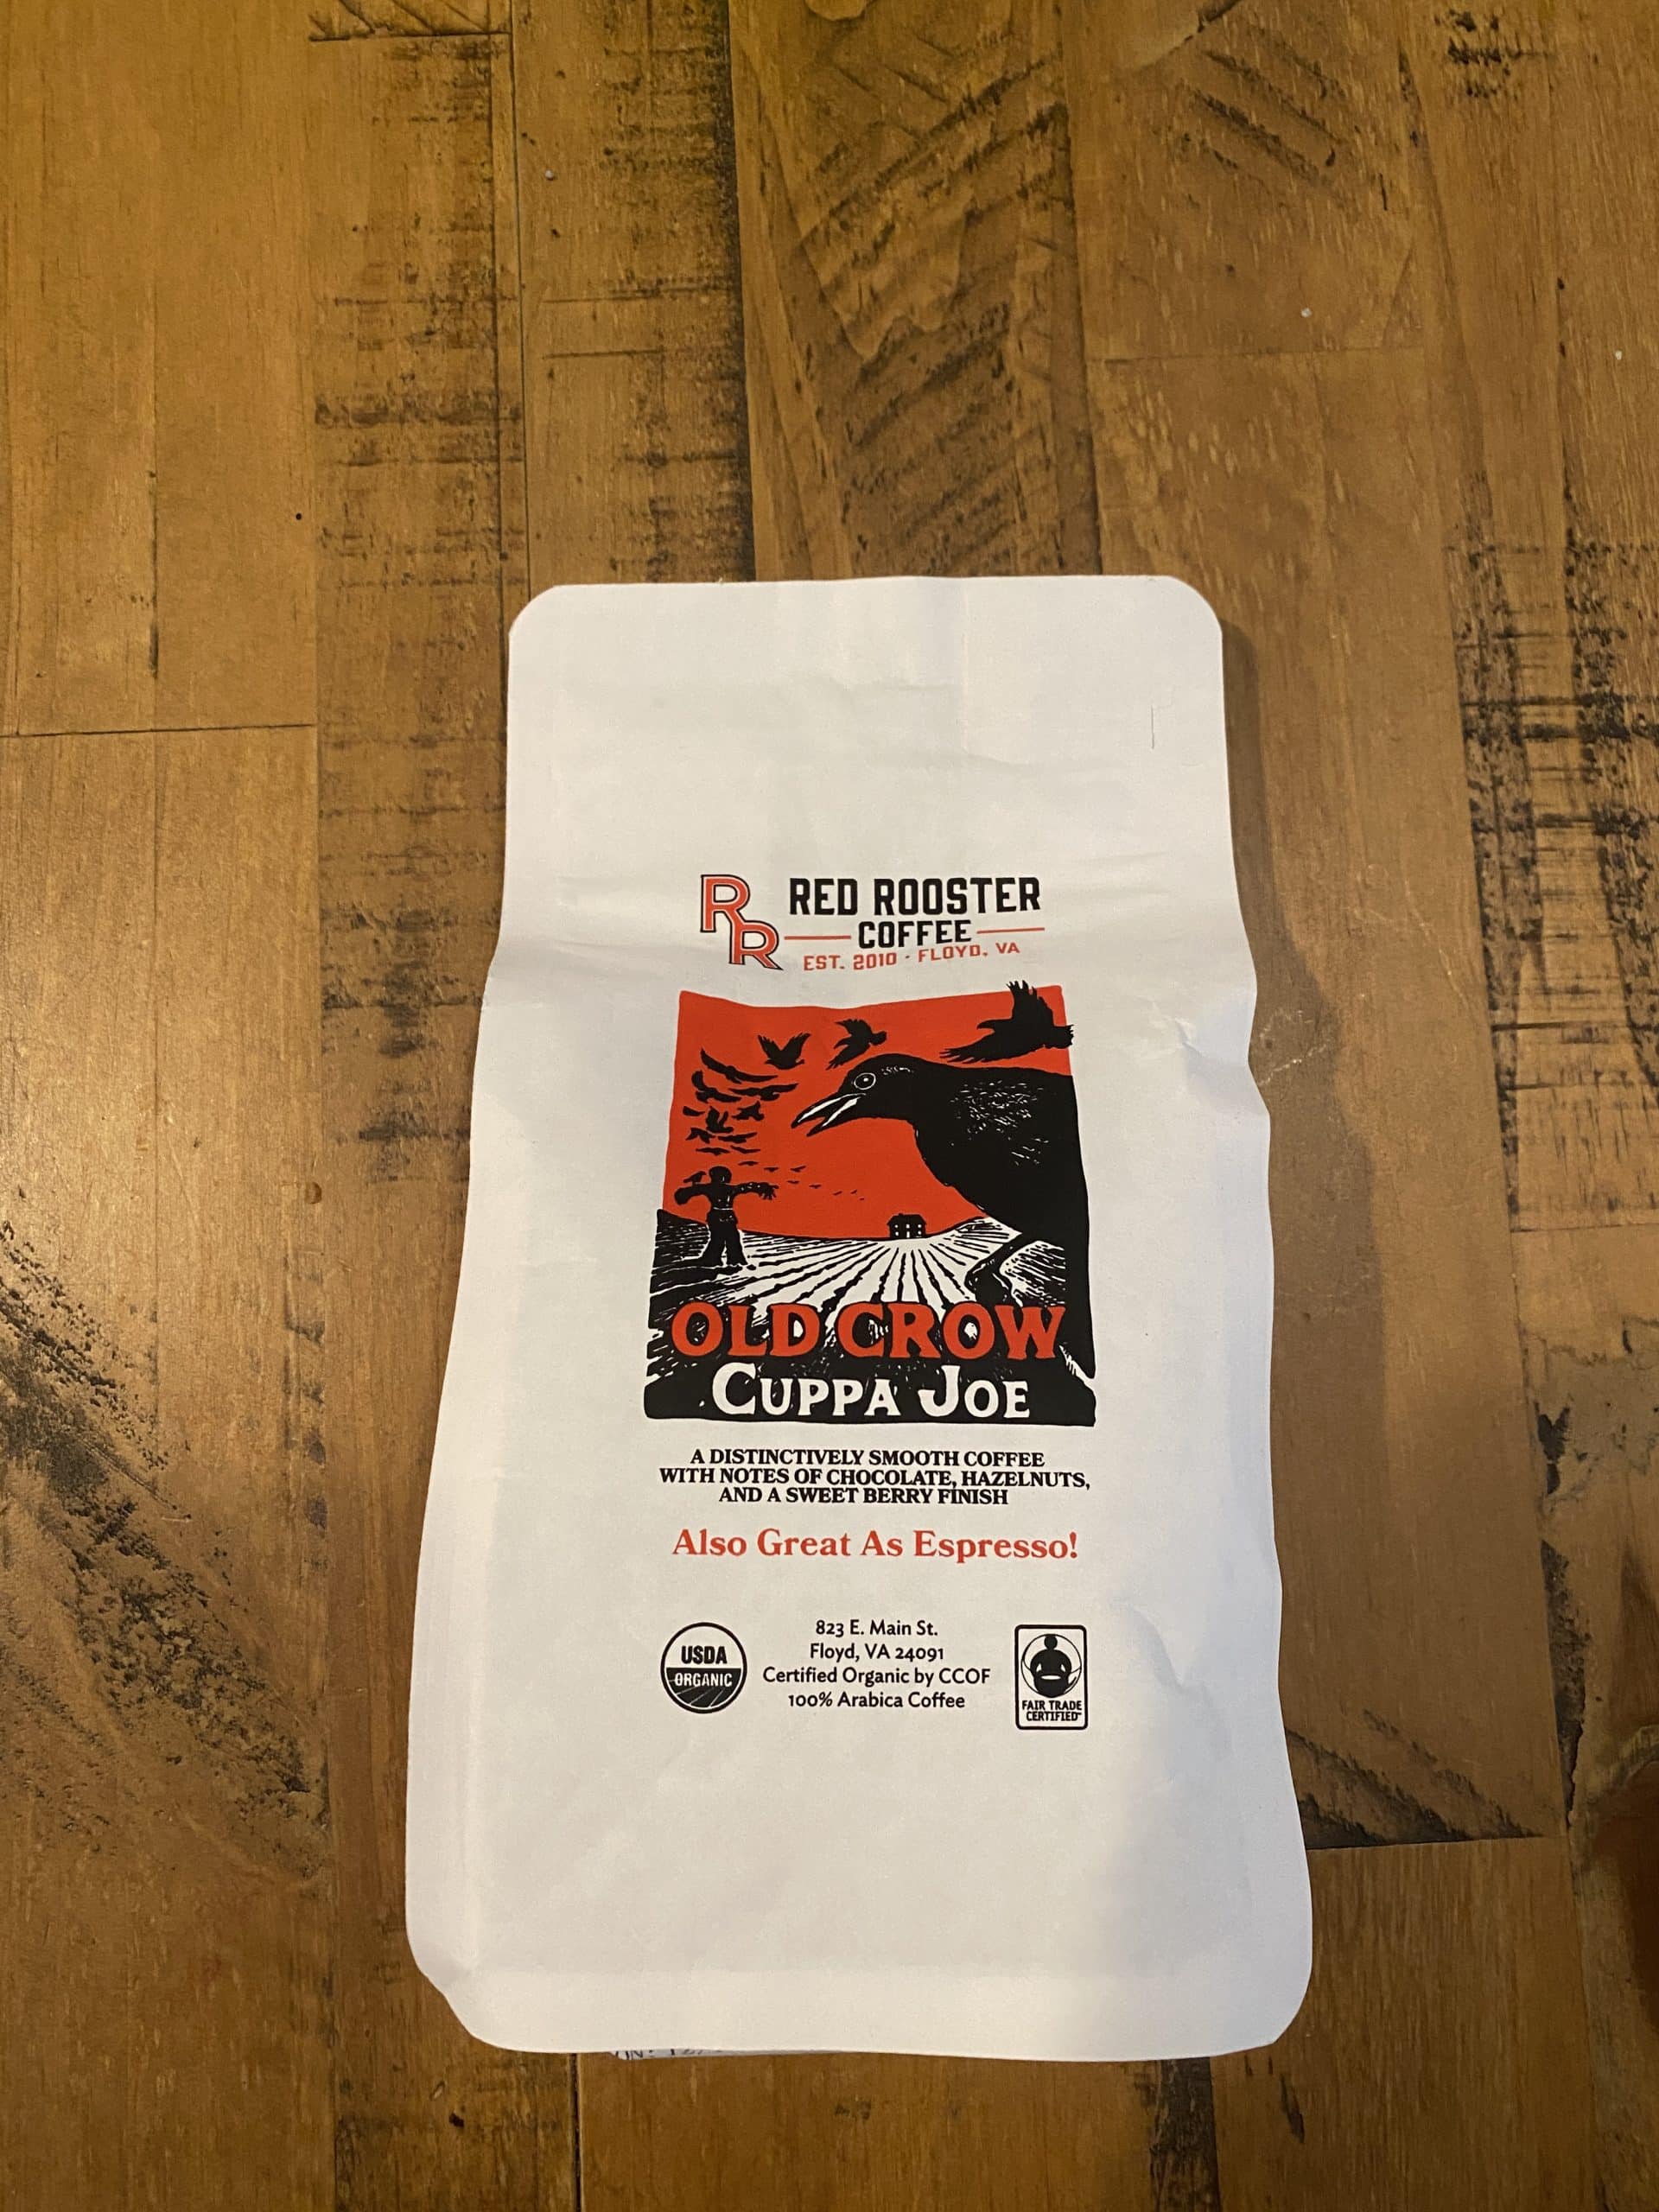 Red Rooster Coffee Review: Old Crow Cuppa Joe